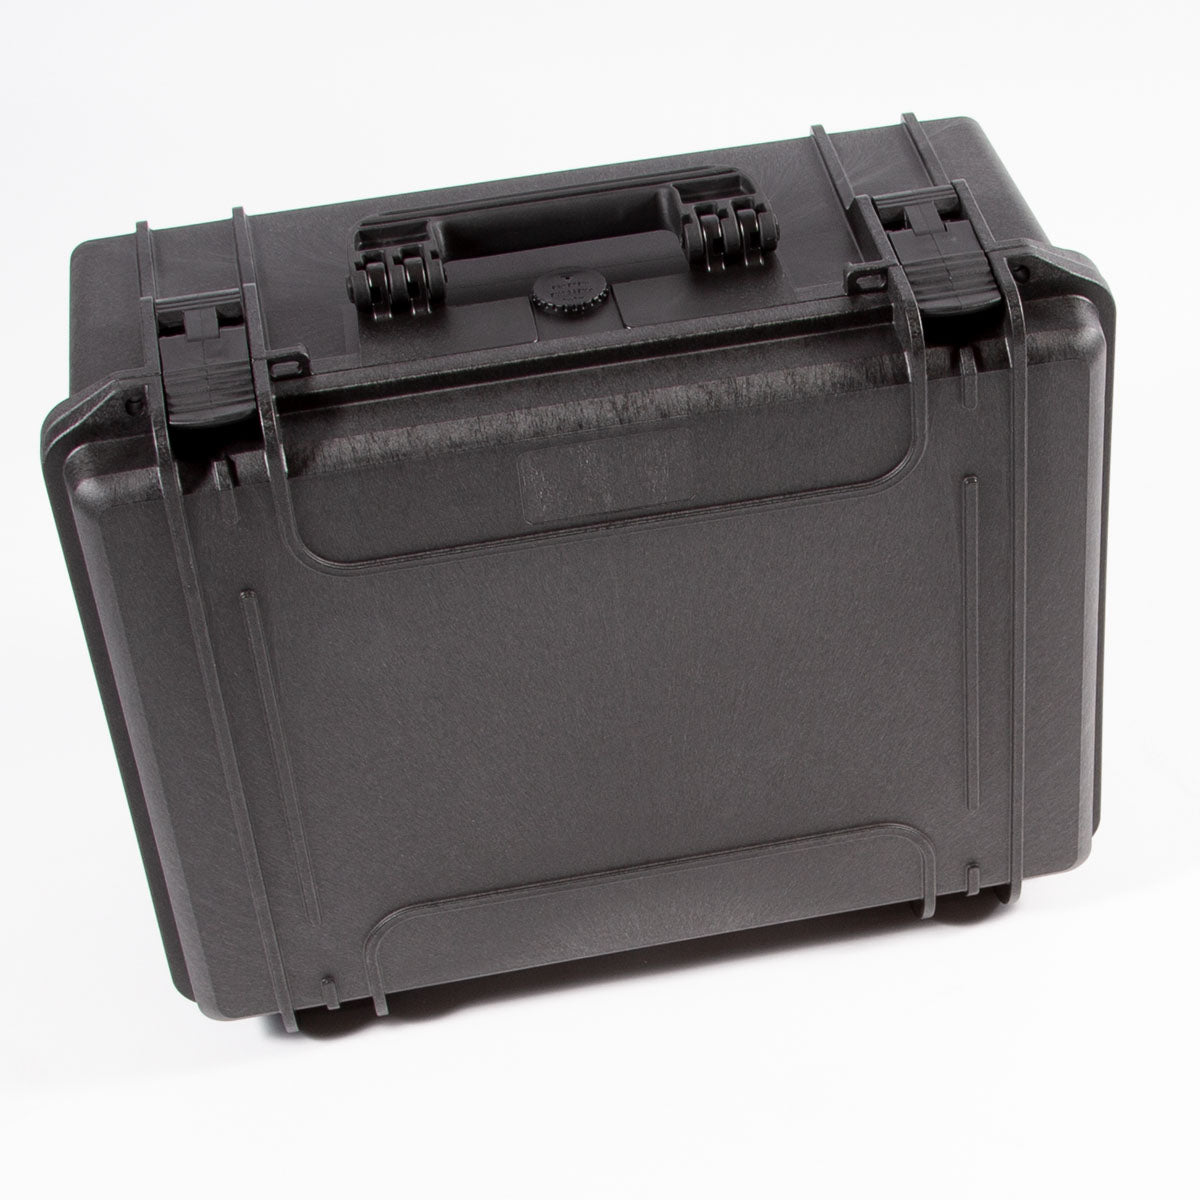 DS-Performance Case - carrying case for Jeti handheld transmitters from Hacker similar to Peli Case 80001860